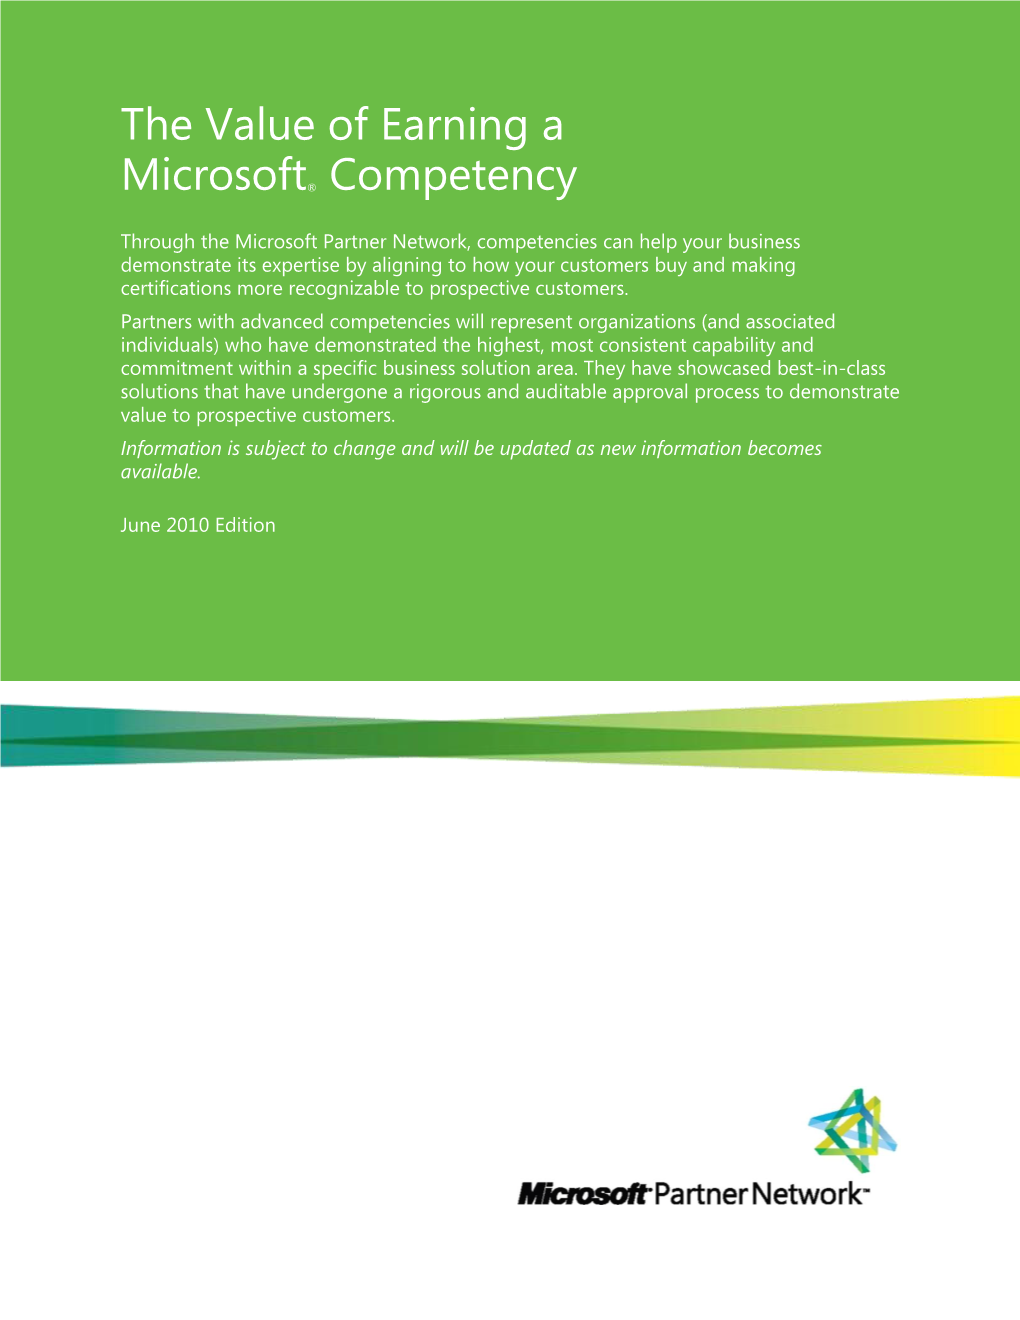 The Value of Earning a Microsoft® Competency | 2